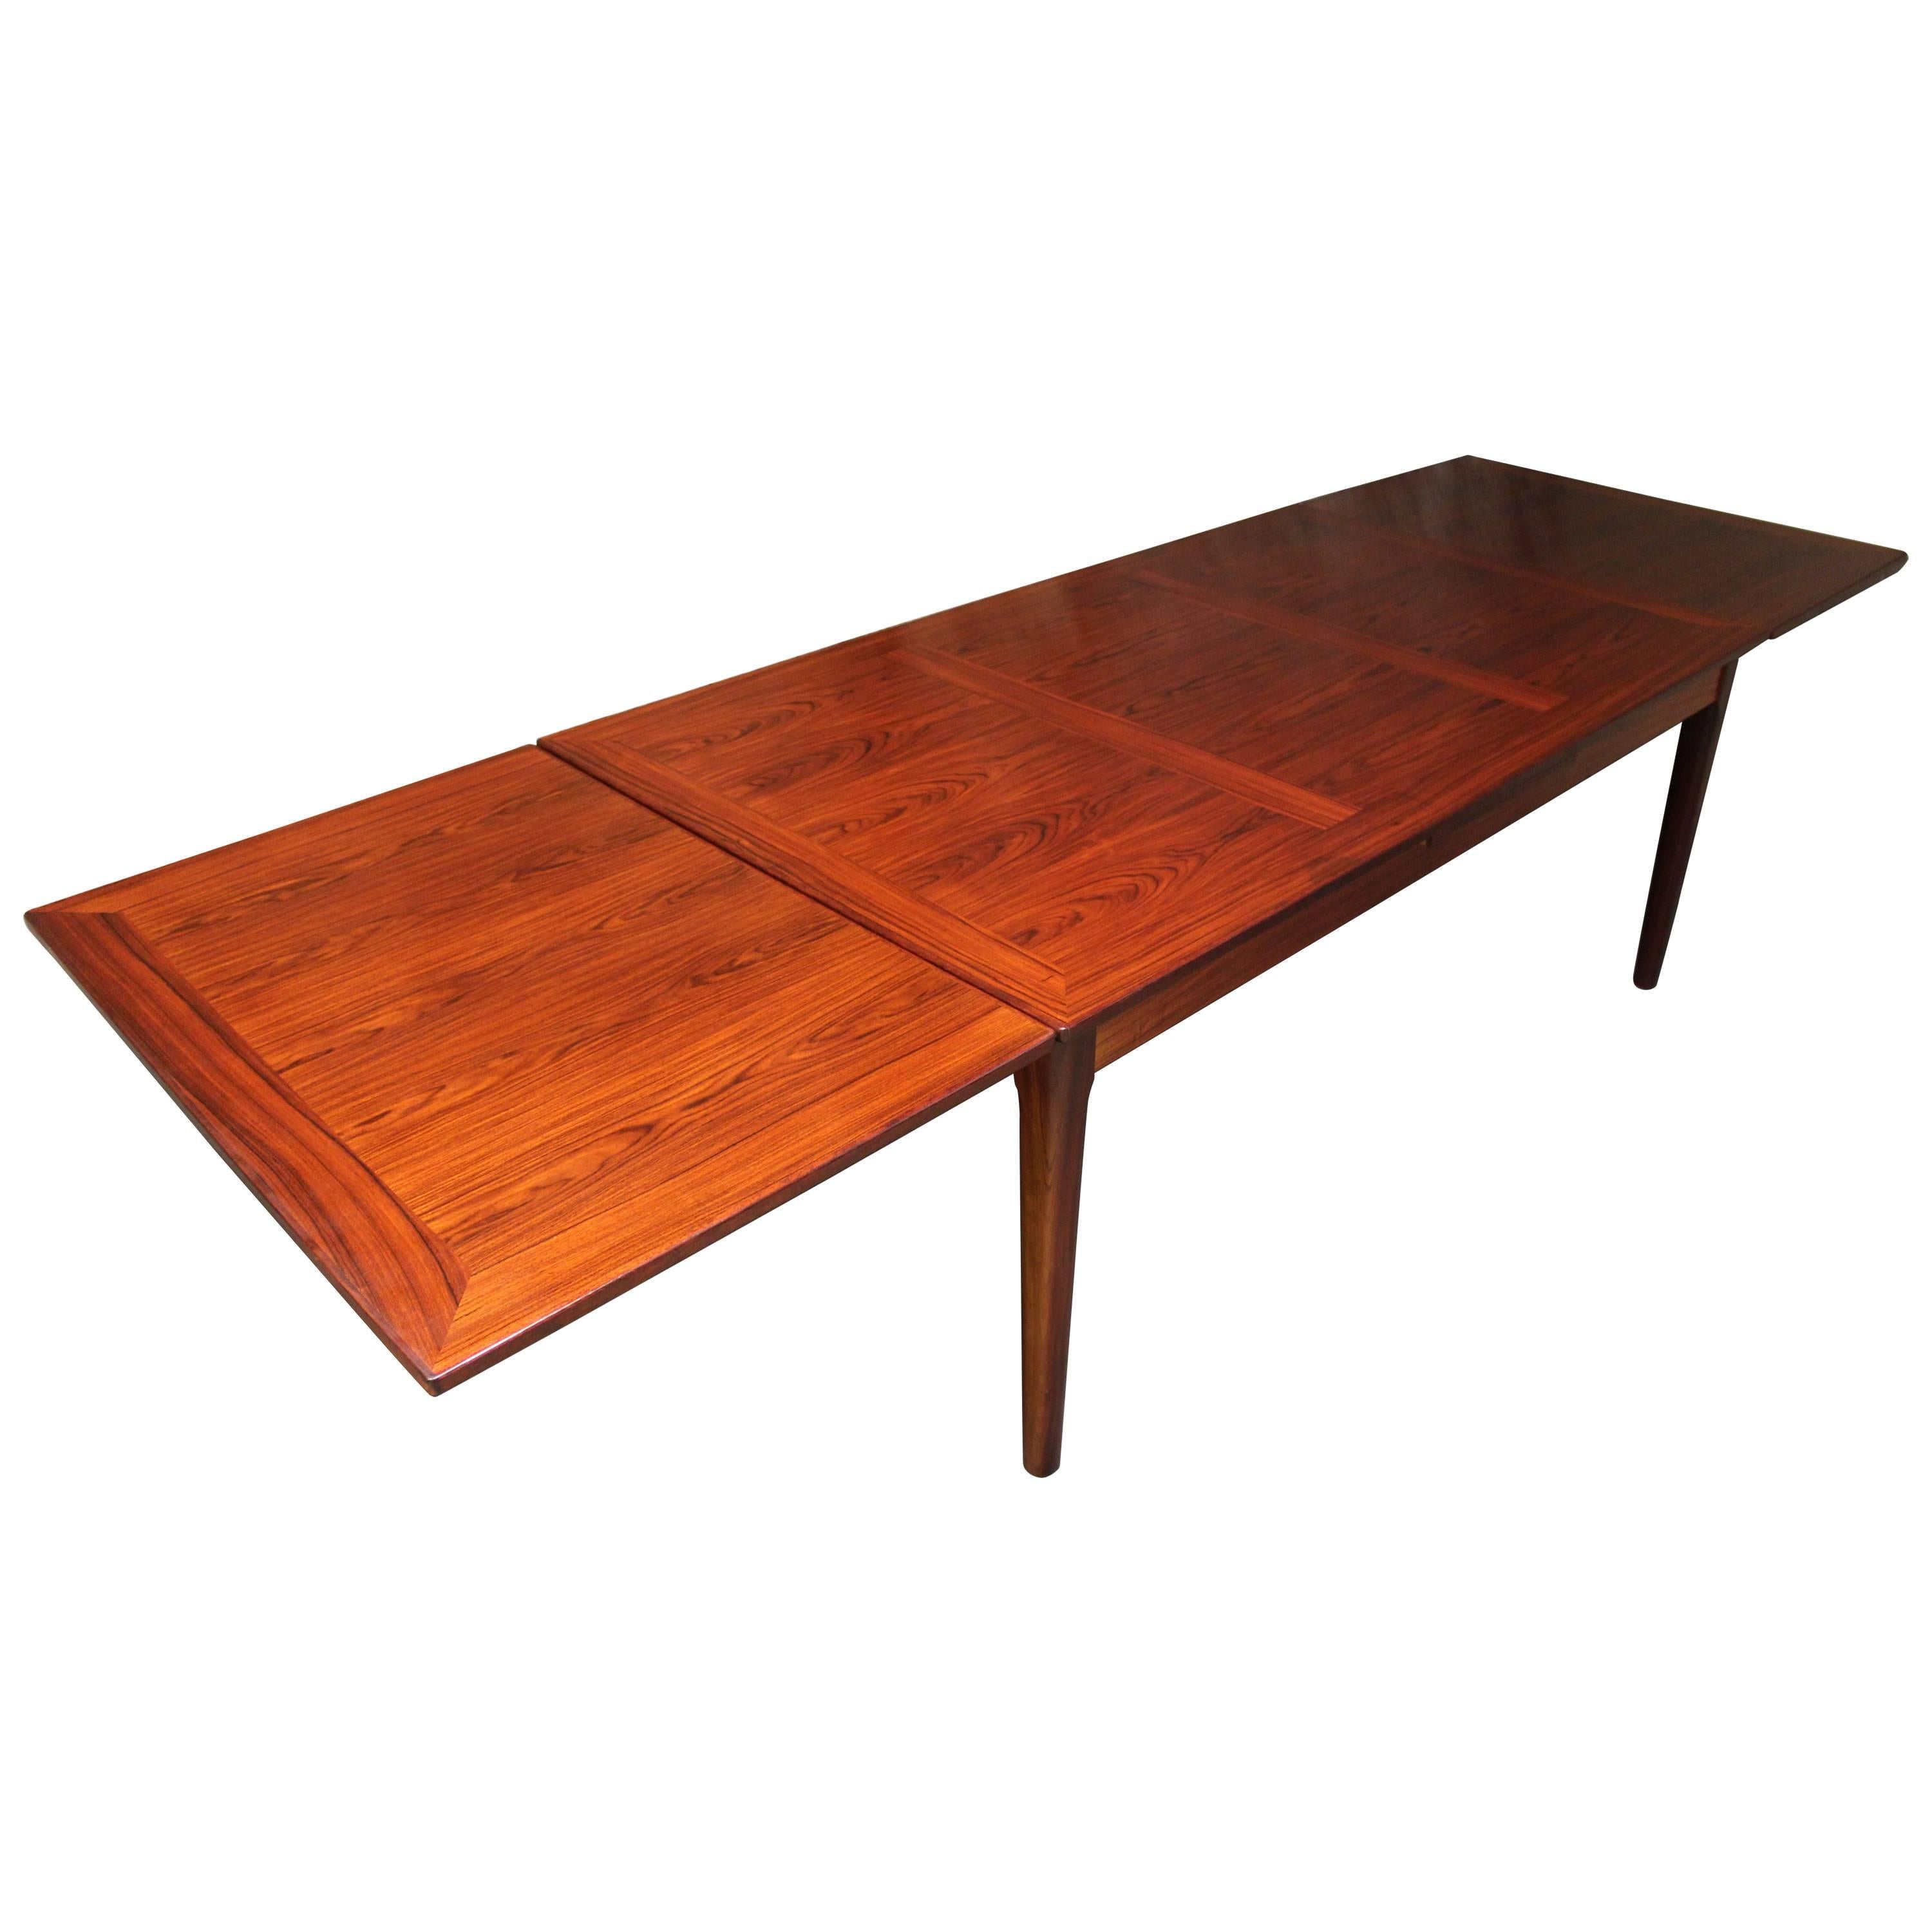 Large Danish Dining Room or Conference Table by Skovby